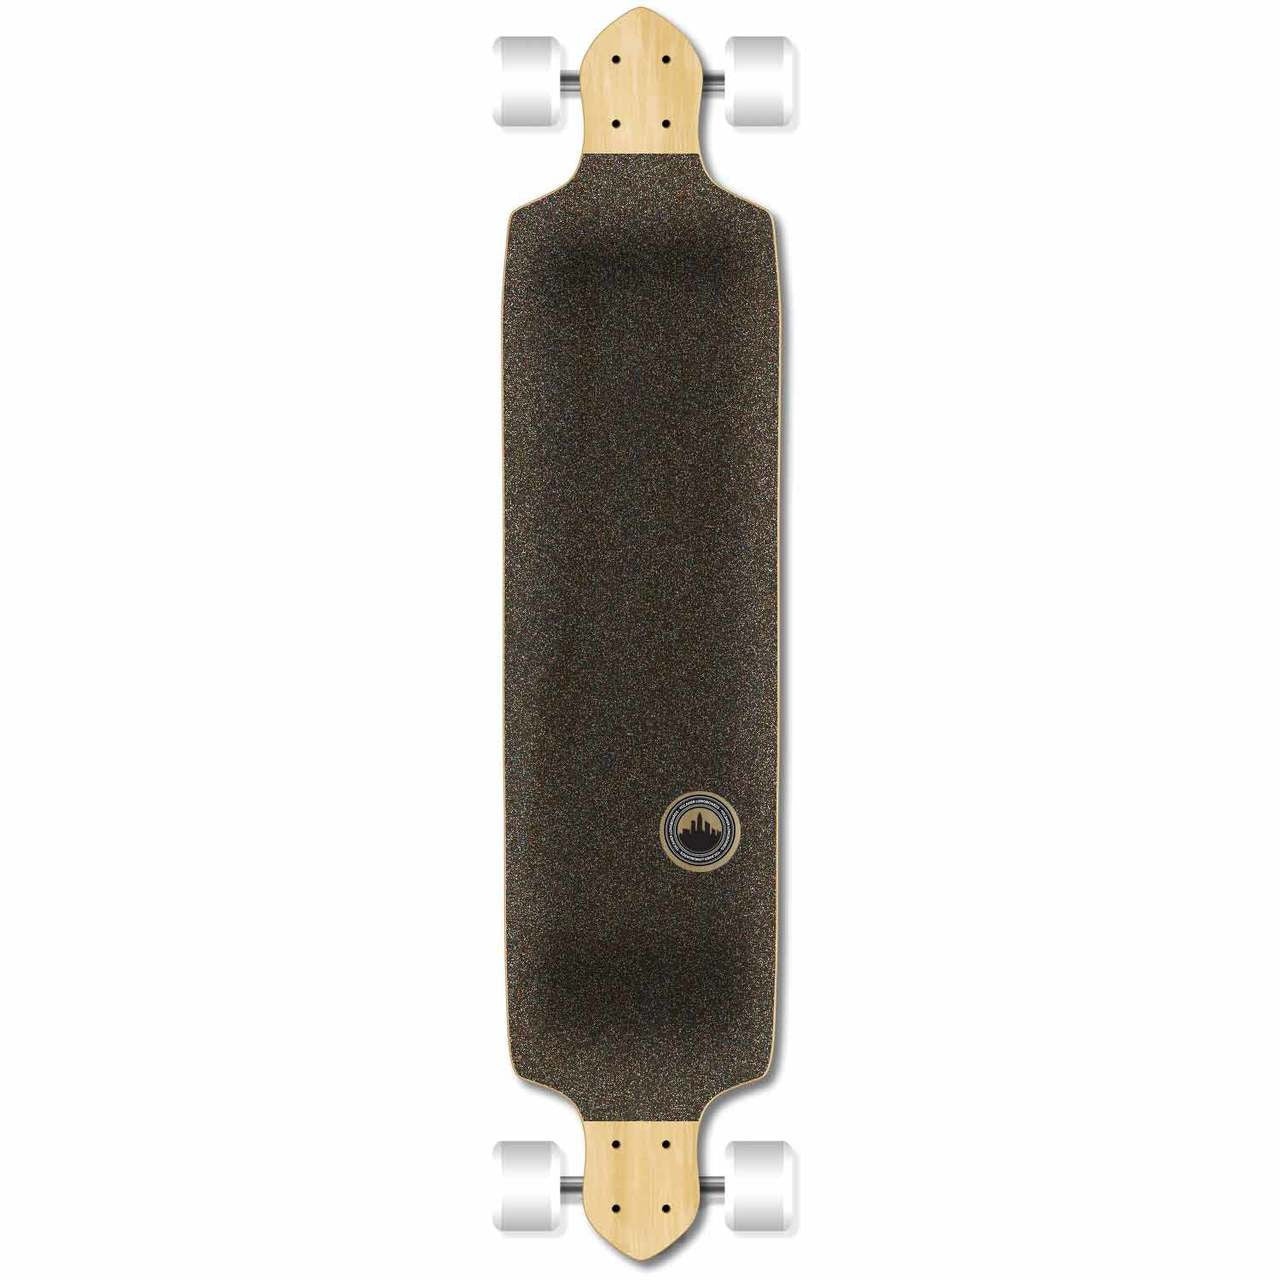 Yocaher Drop Down Longboard Complete - Crest Onyx